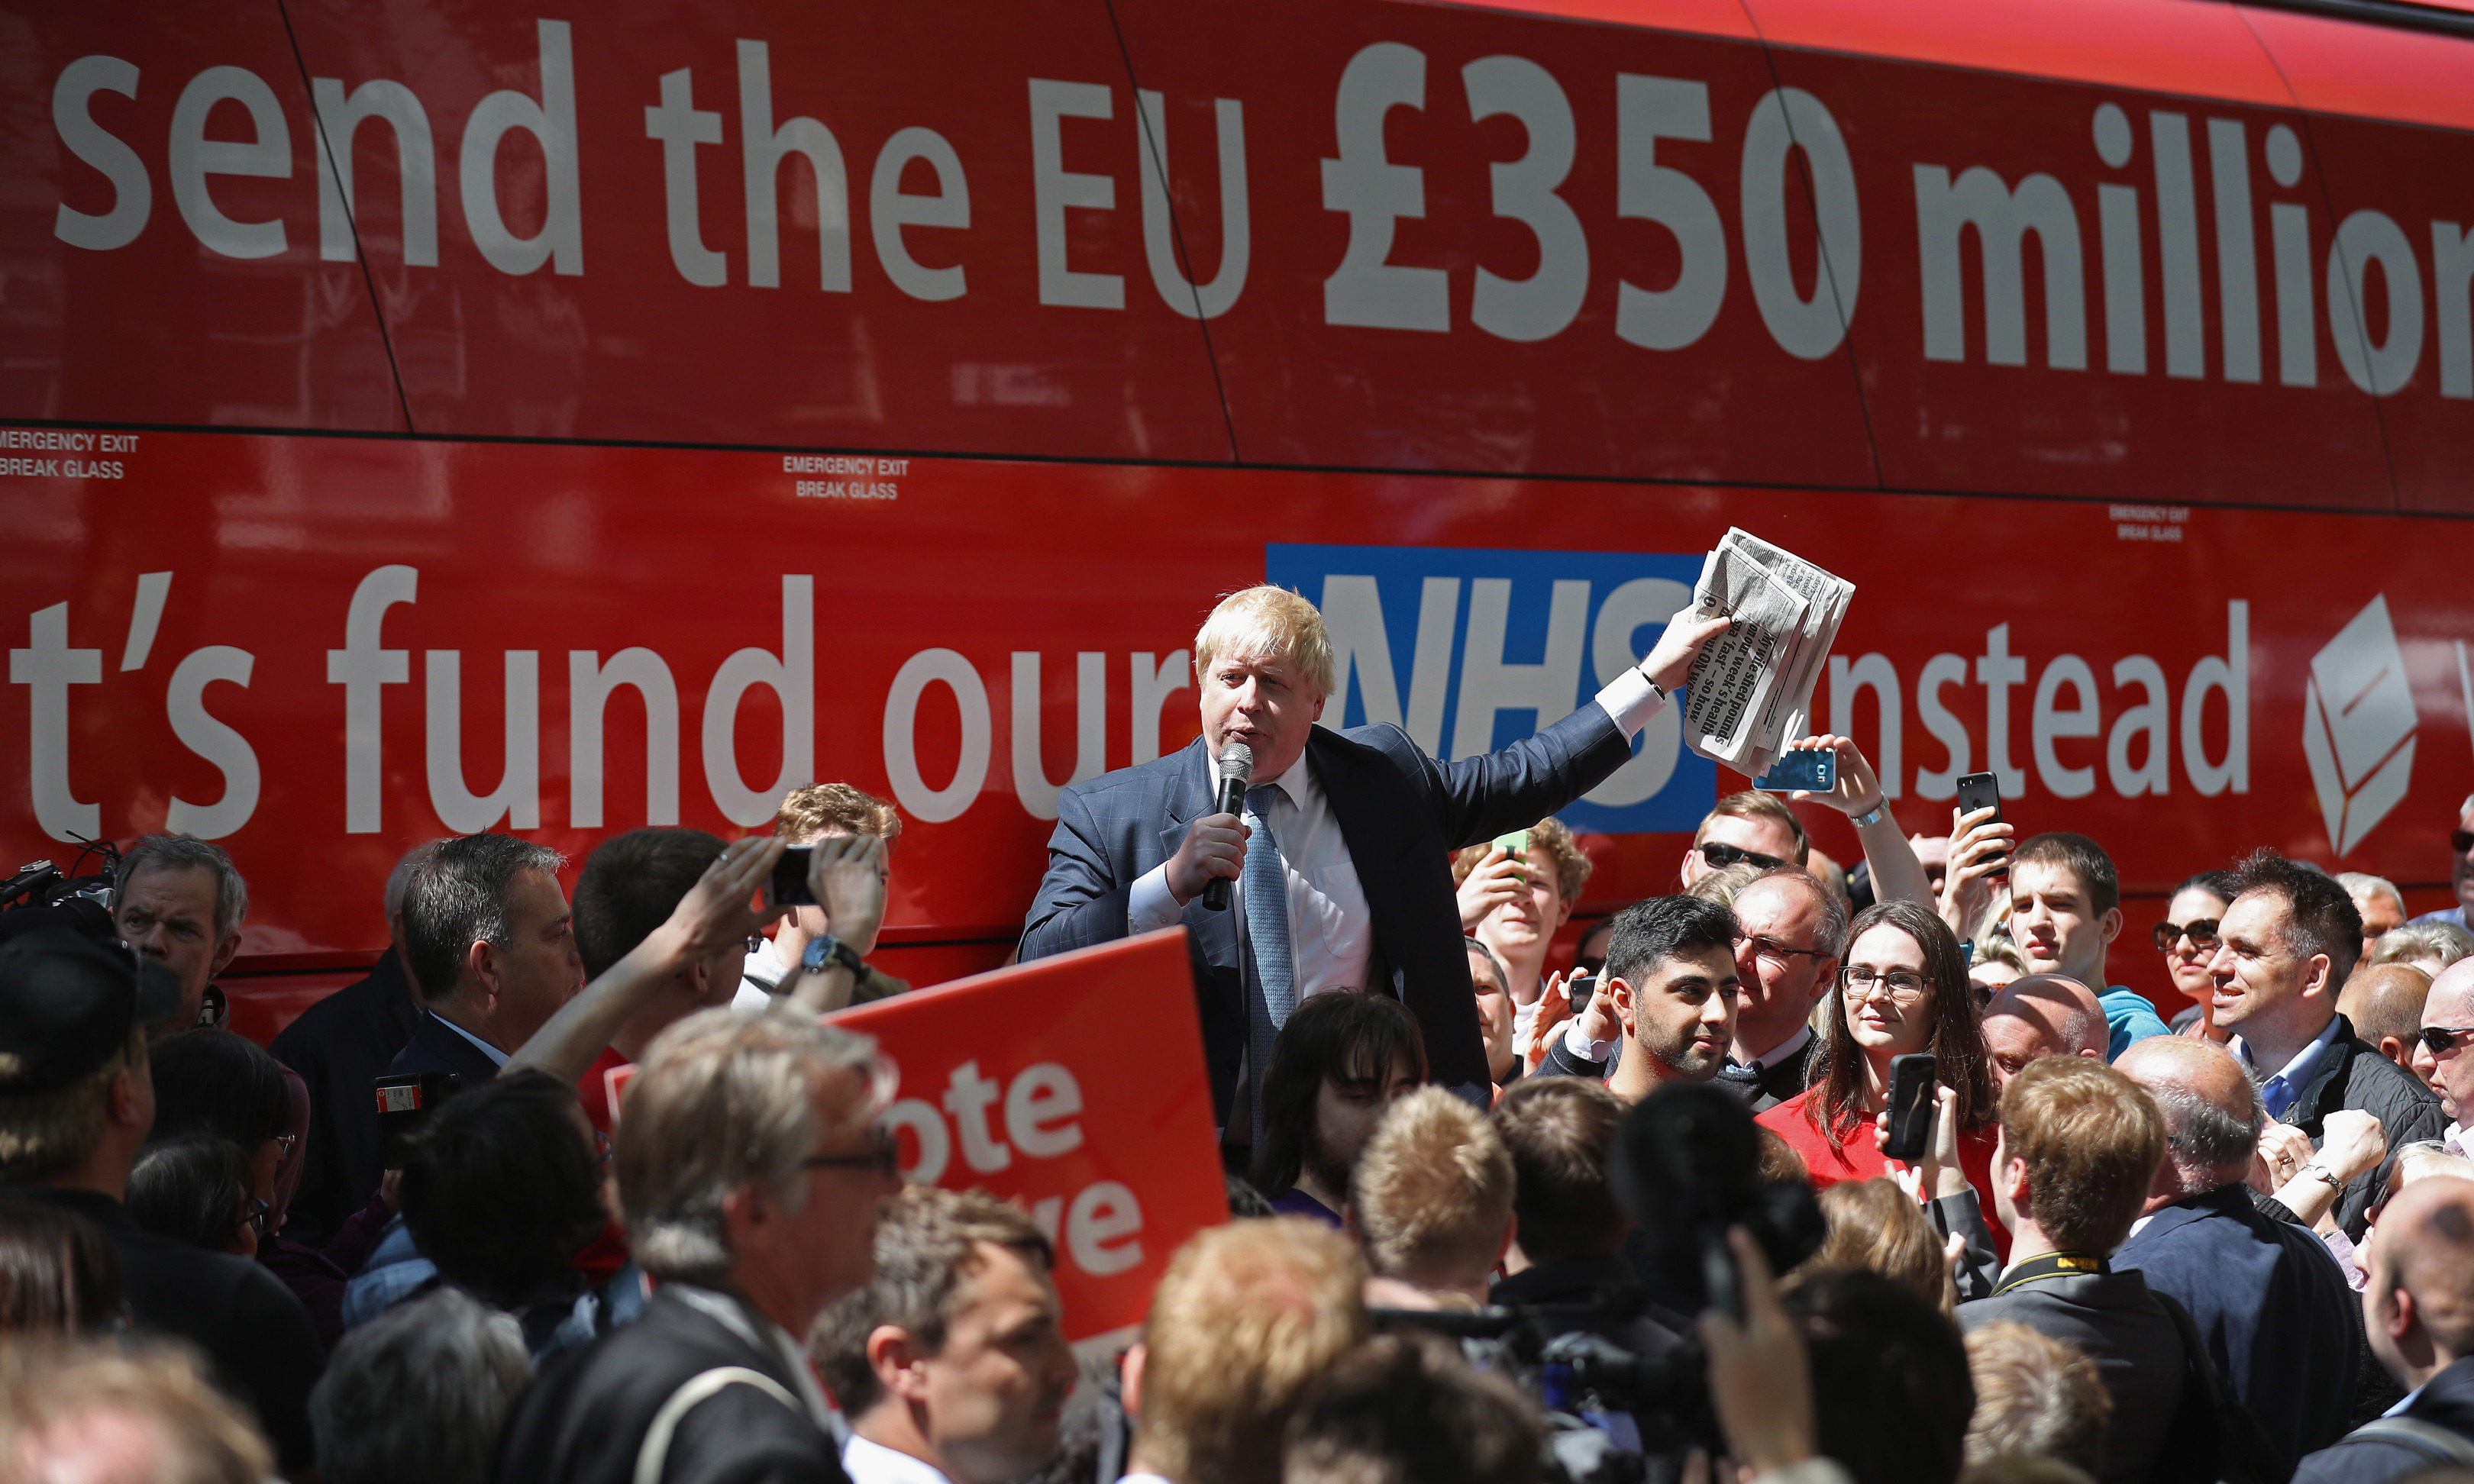 Boris Johnson MP  addresses members of the public in Parliament St, York during the Brexit Battle Bus tour of the UK on May 23, 2016